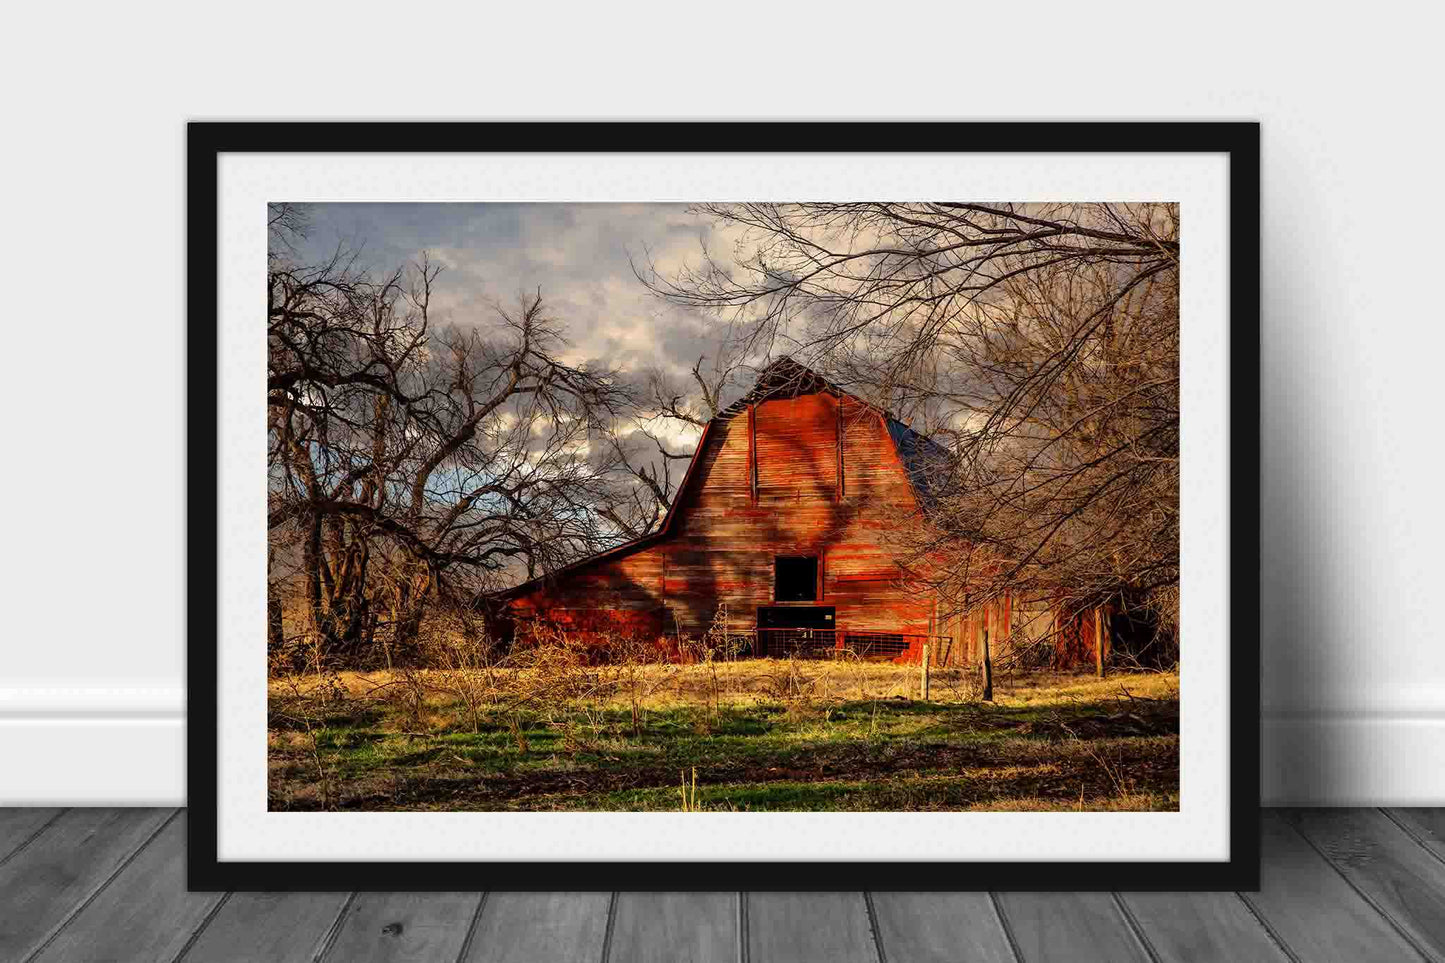 Framed and matted country photography print of a rustic red barn on an autumn day in Oklahoma by Sean Ramsey of Southern Plains Photography.